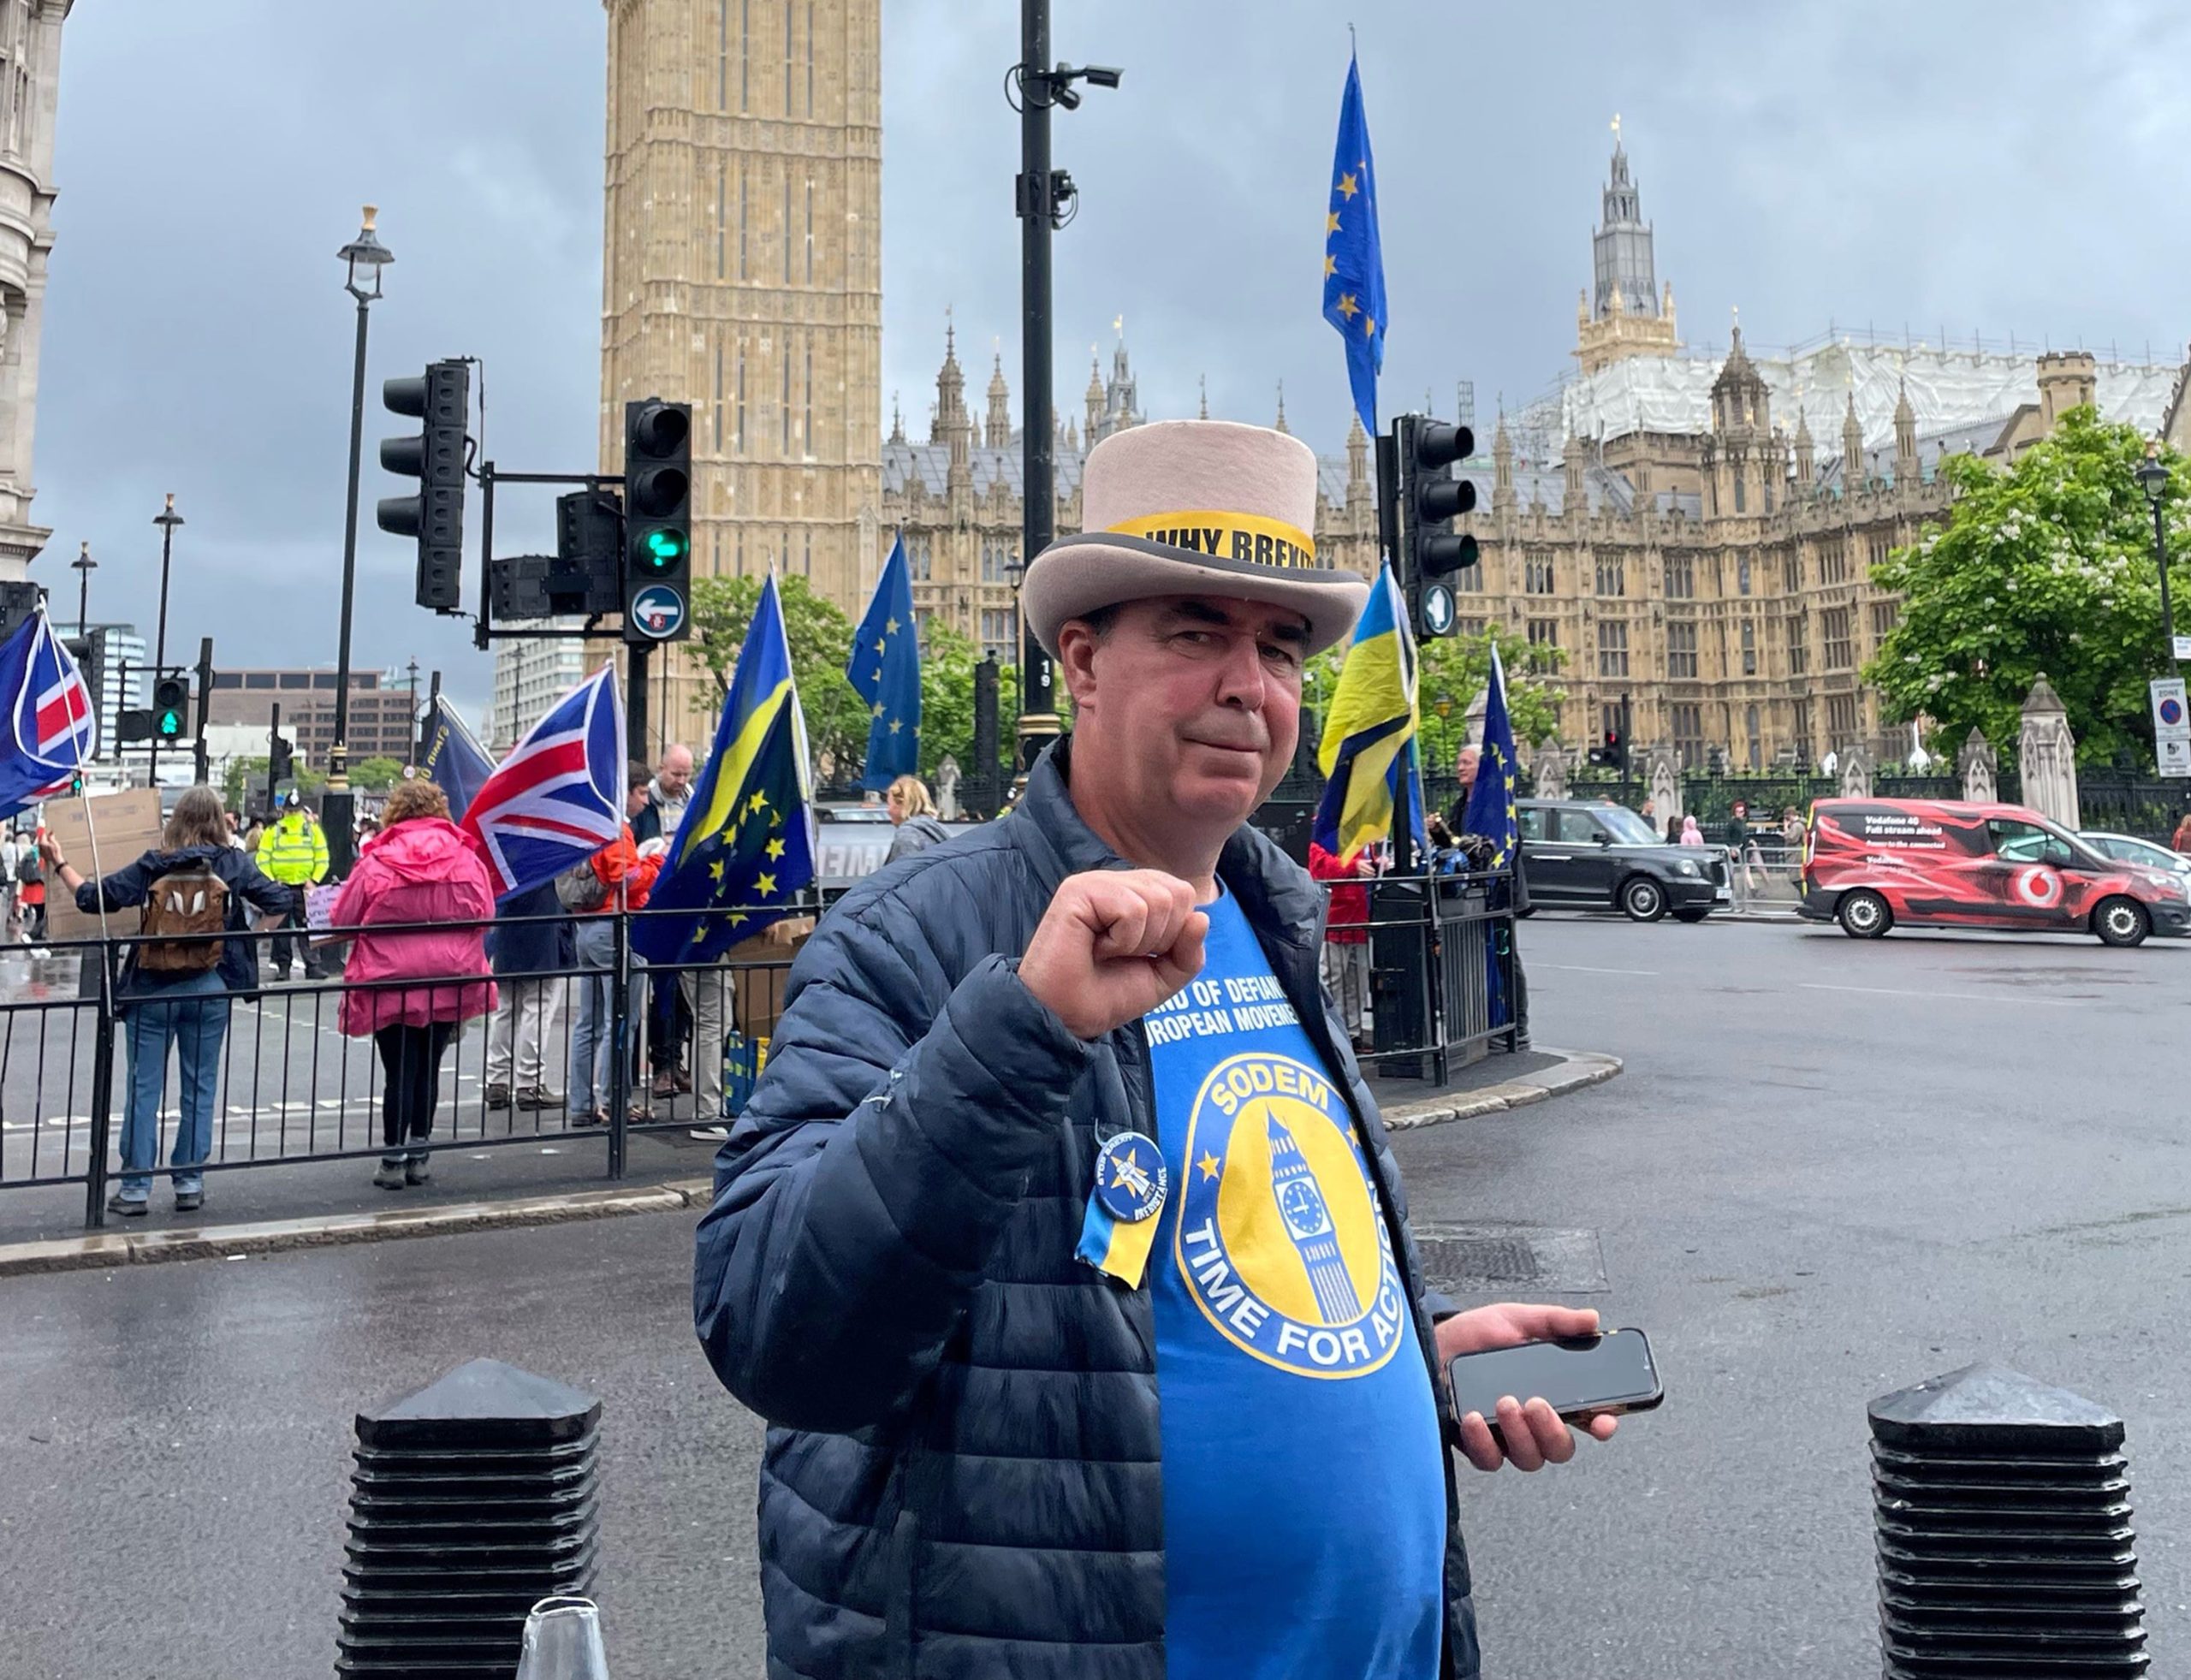 Steve Bray: Stop Brexit Man vows to protest ‘twice as loud’ after police seize amplifiers